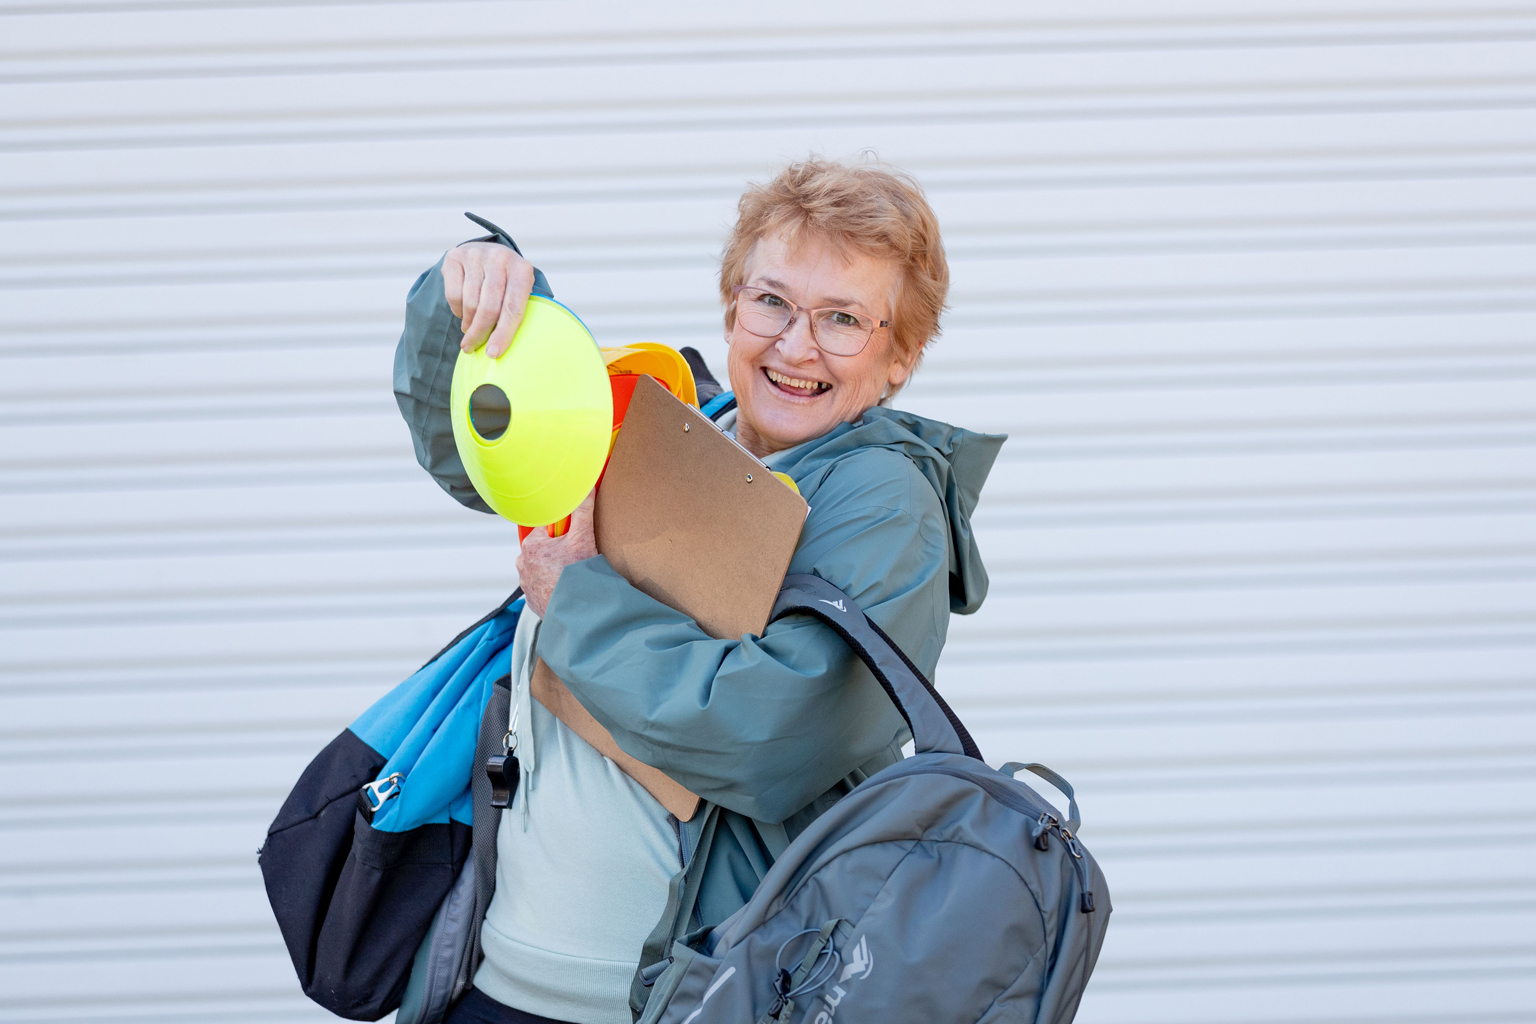 A woman smiles while juggling sporting bags and equipment